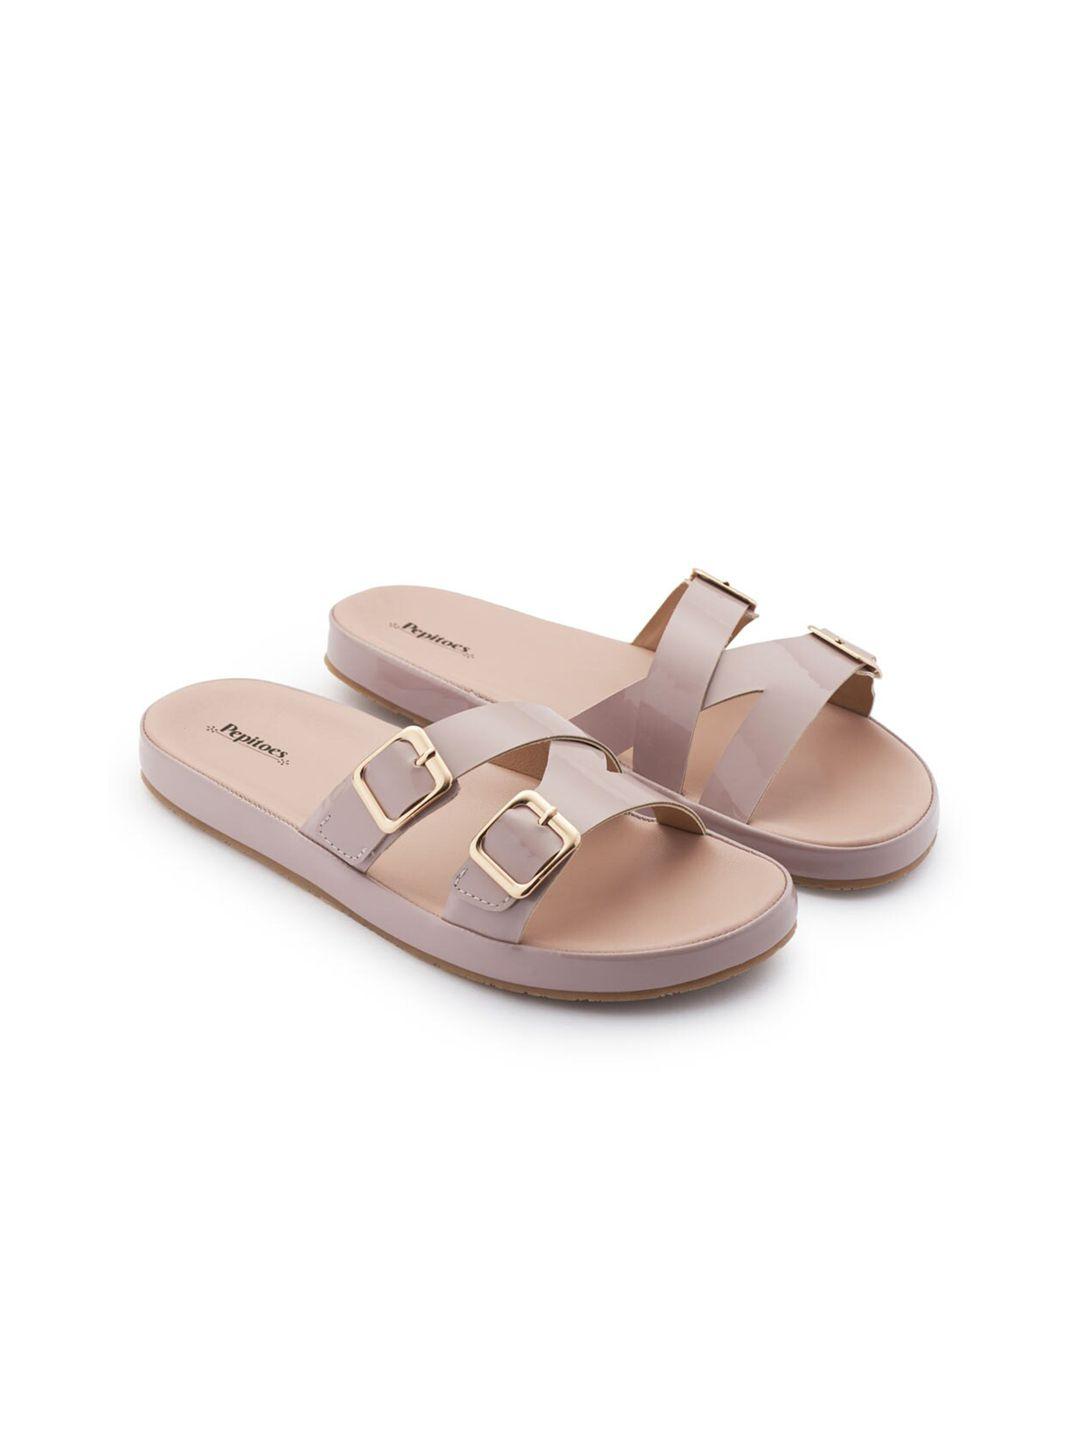 pepitoes open toe flats with buckles